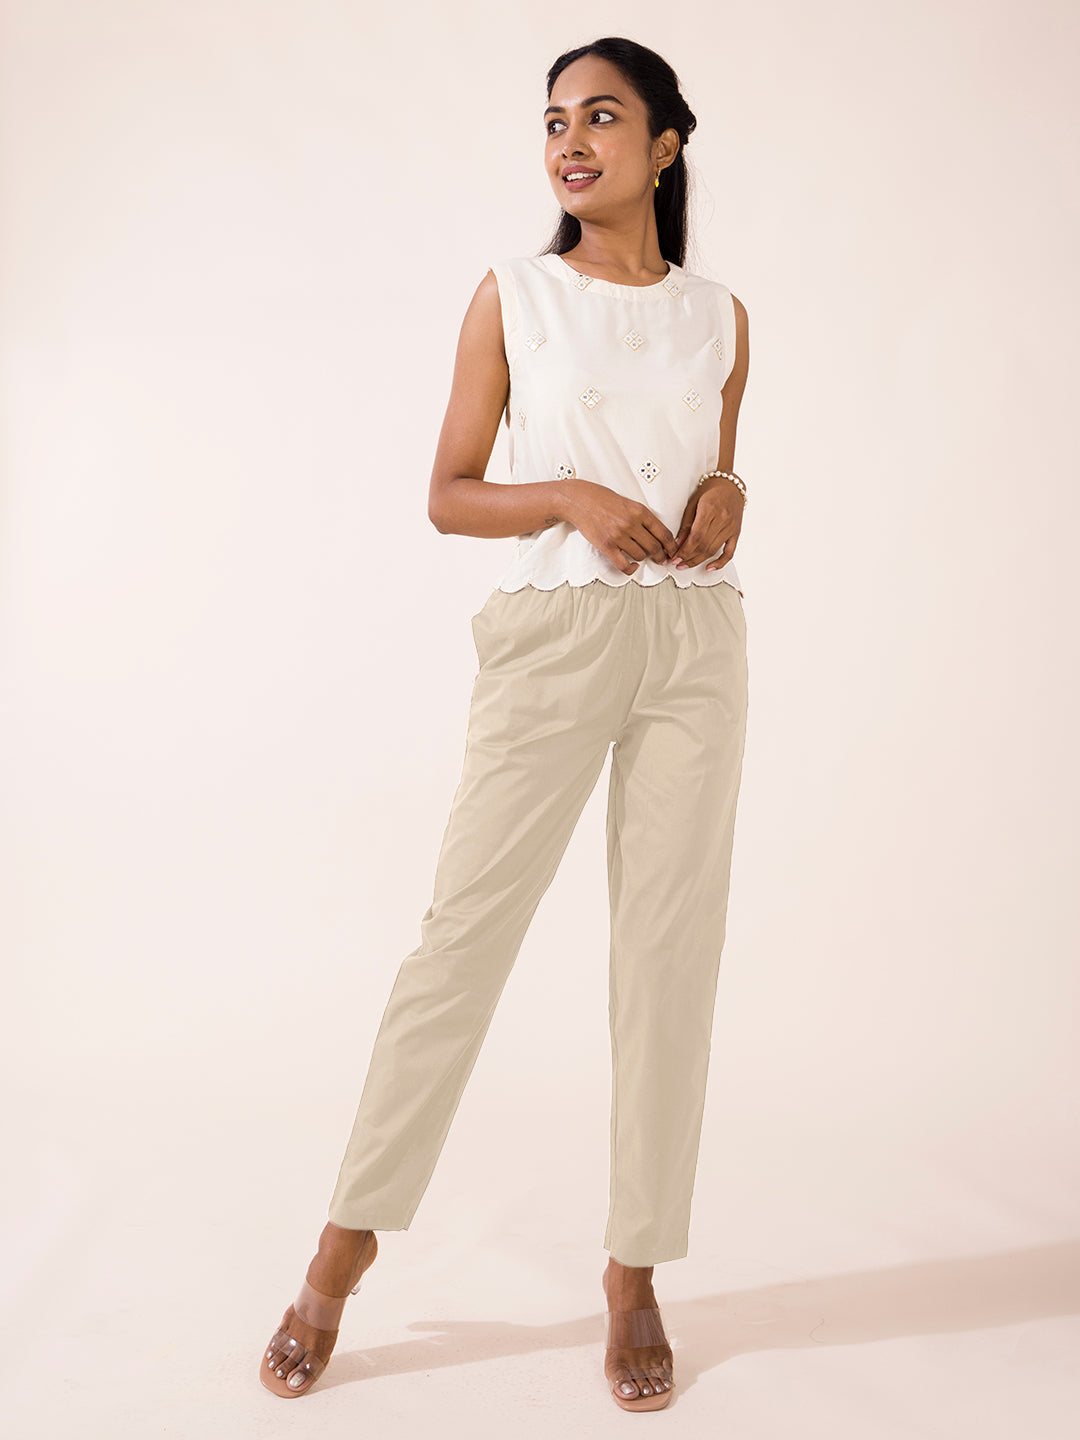 Women's High-Rise Ankle Jogger Pants - A New Day Cream XL 1 ct | Shipt